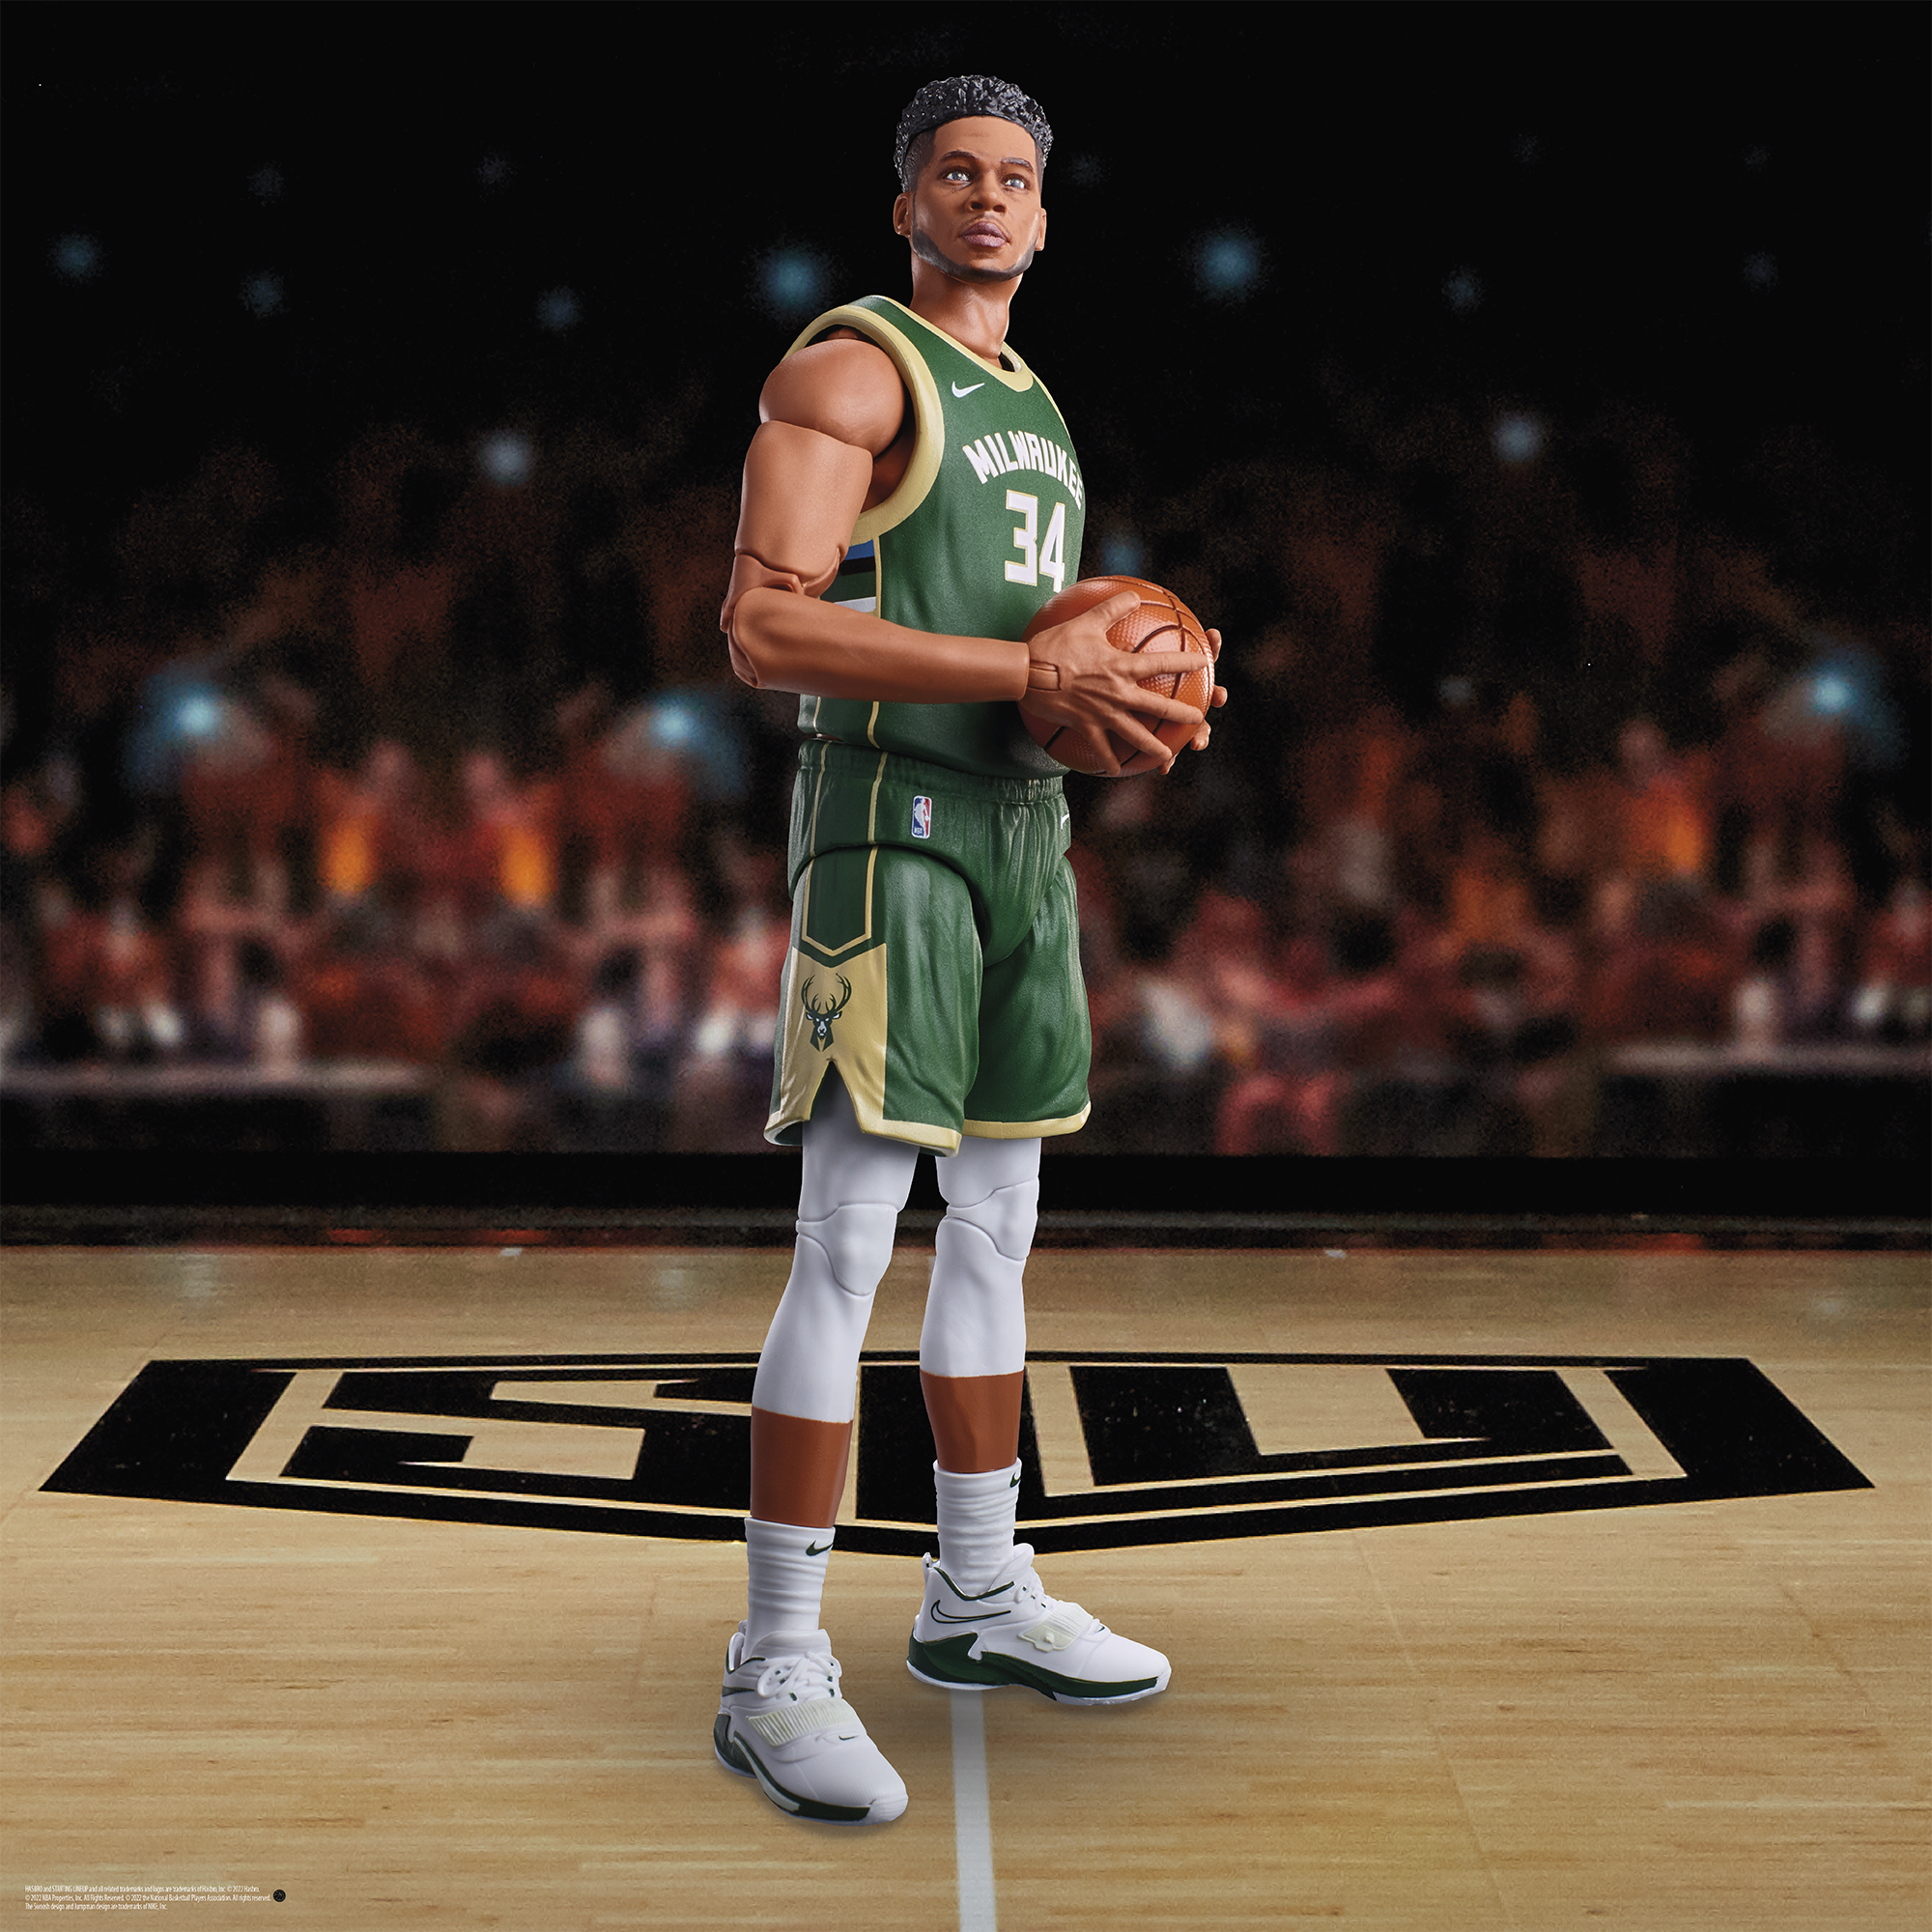 Giannis Antetokounmpo Gold Edition – Jersey Crate